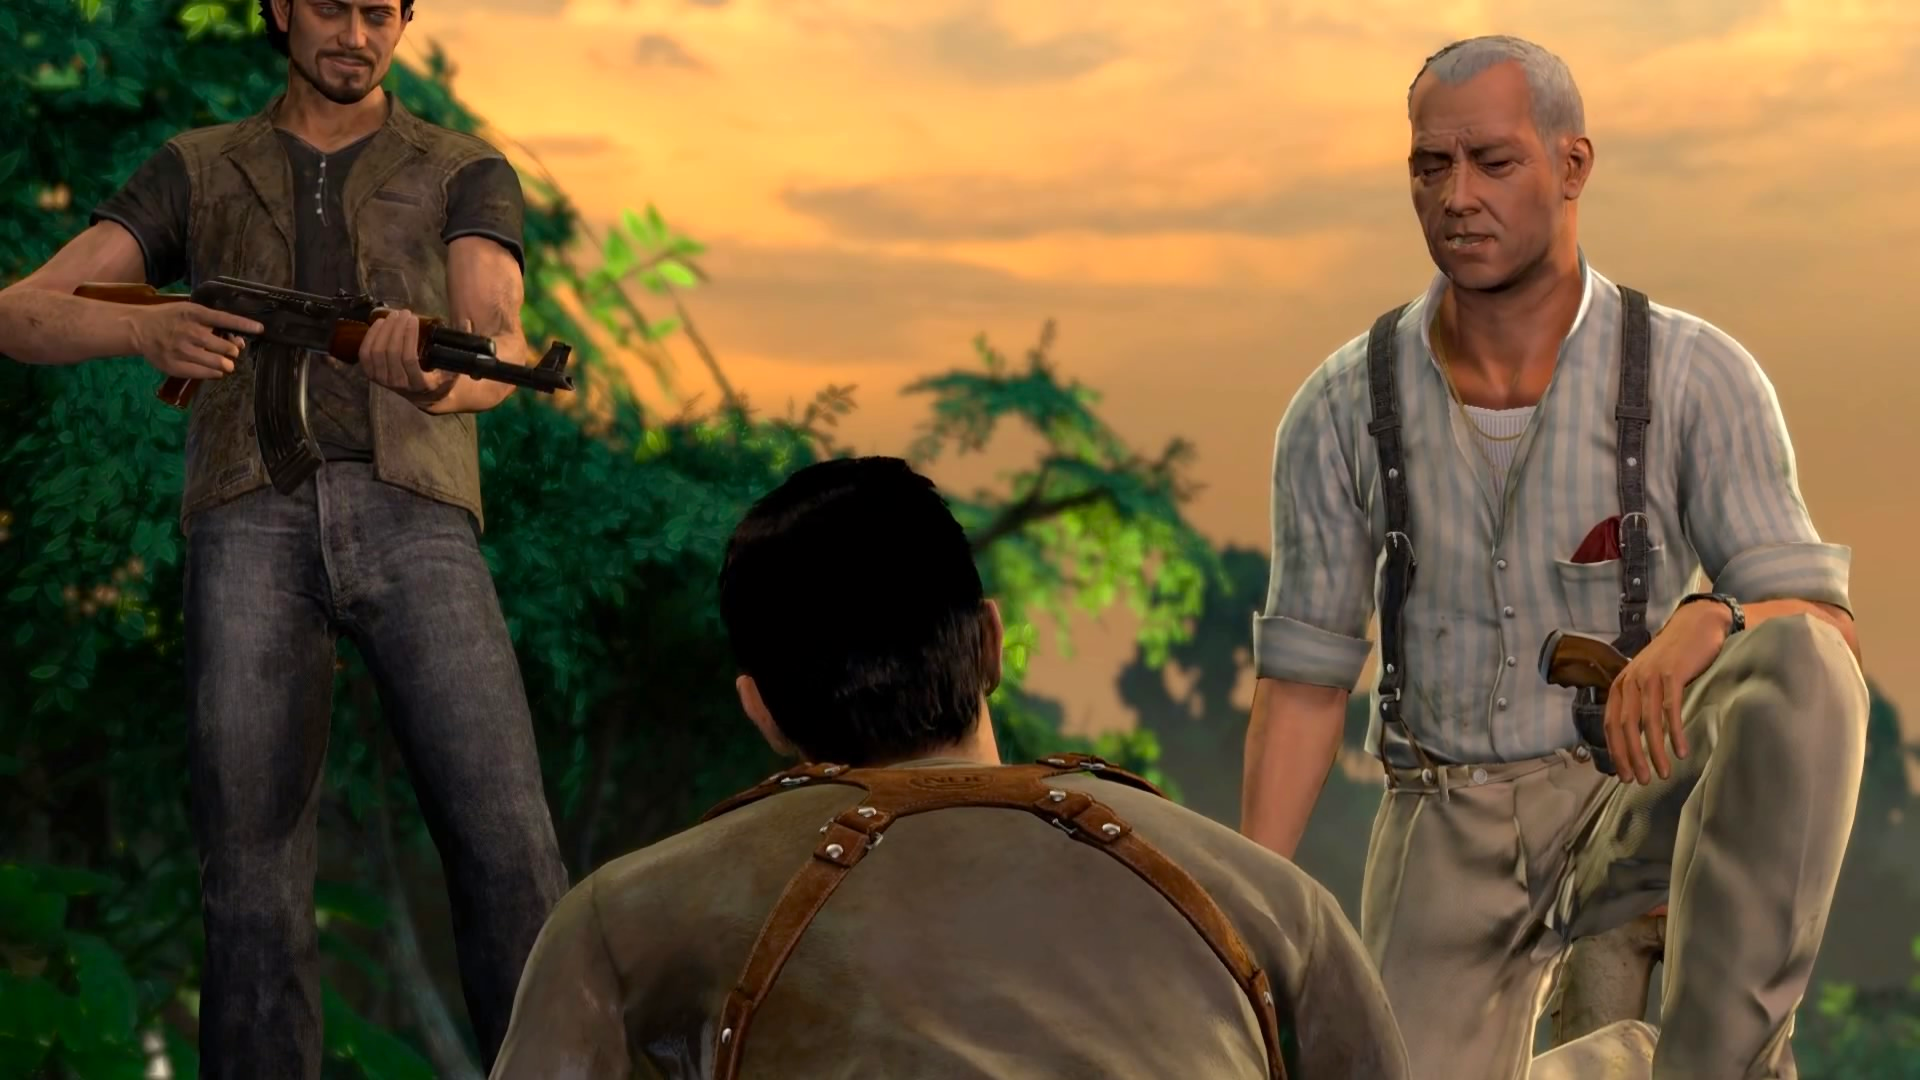 Uncharted: Drake's Fortune - Between Life and Games